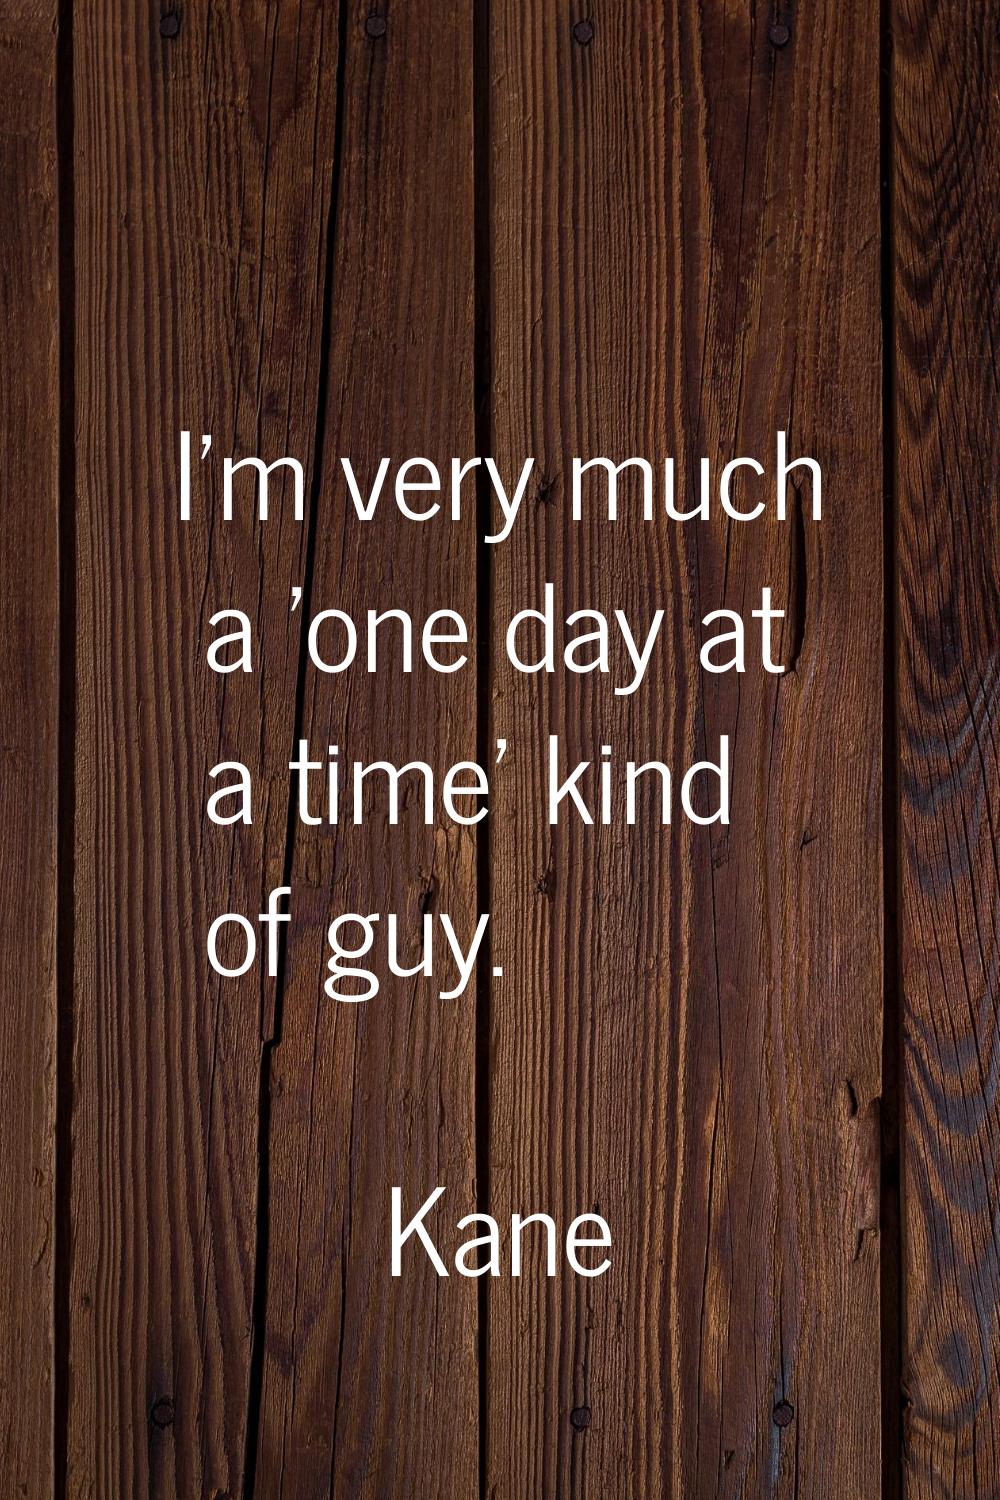 I'm very much a 'one day at a time' kind of guy.